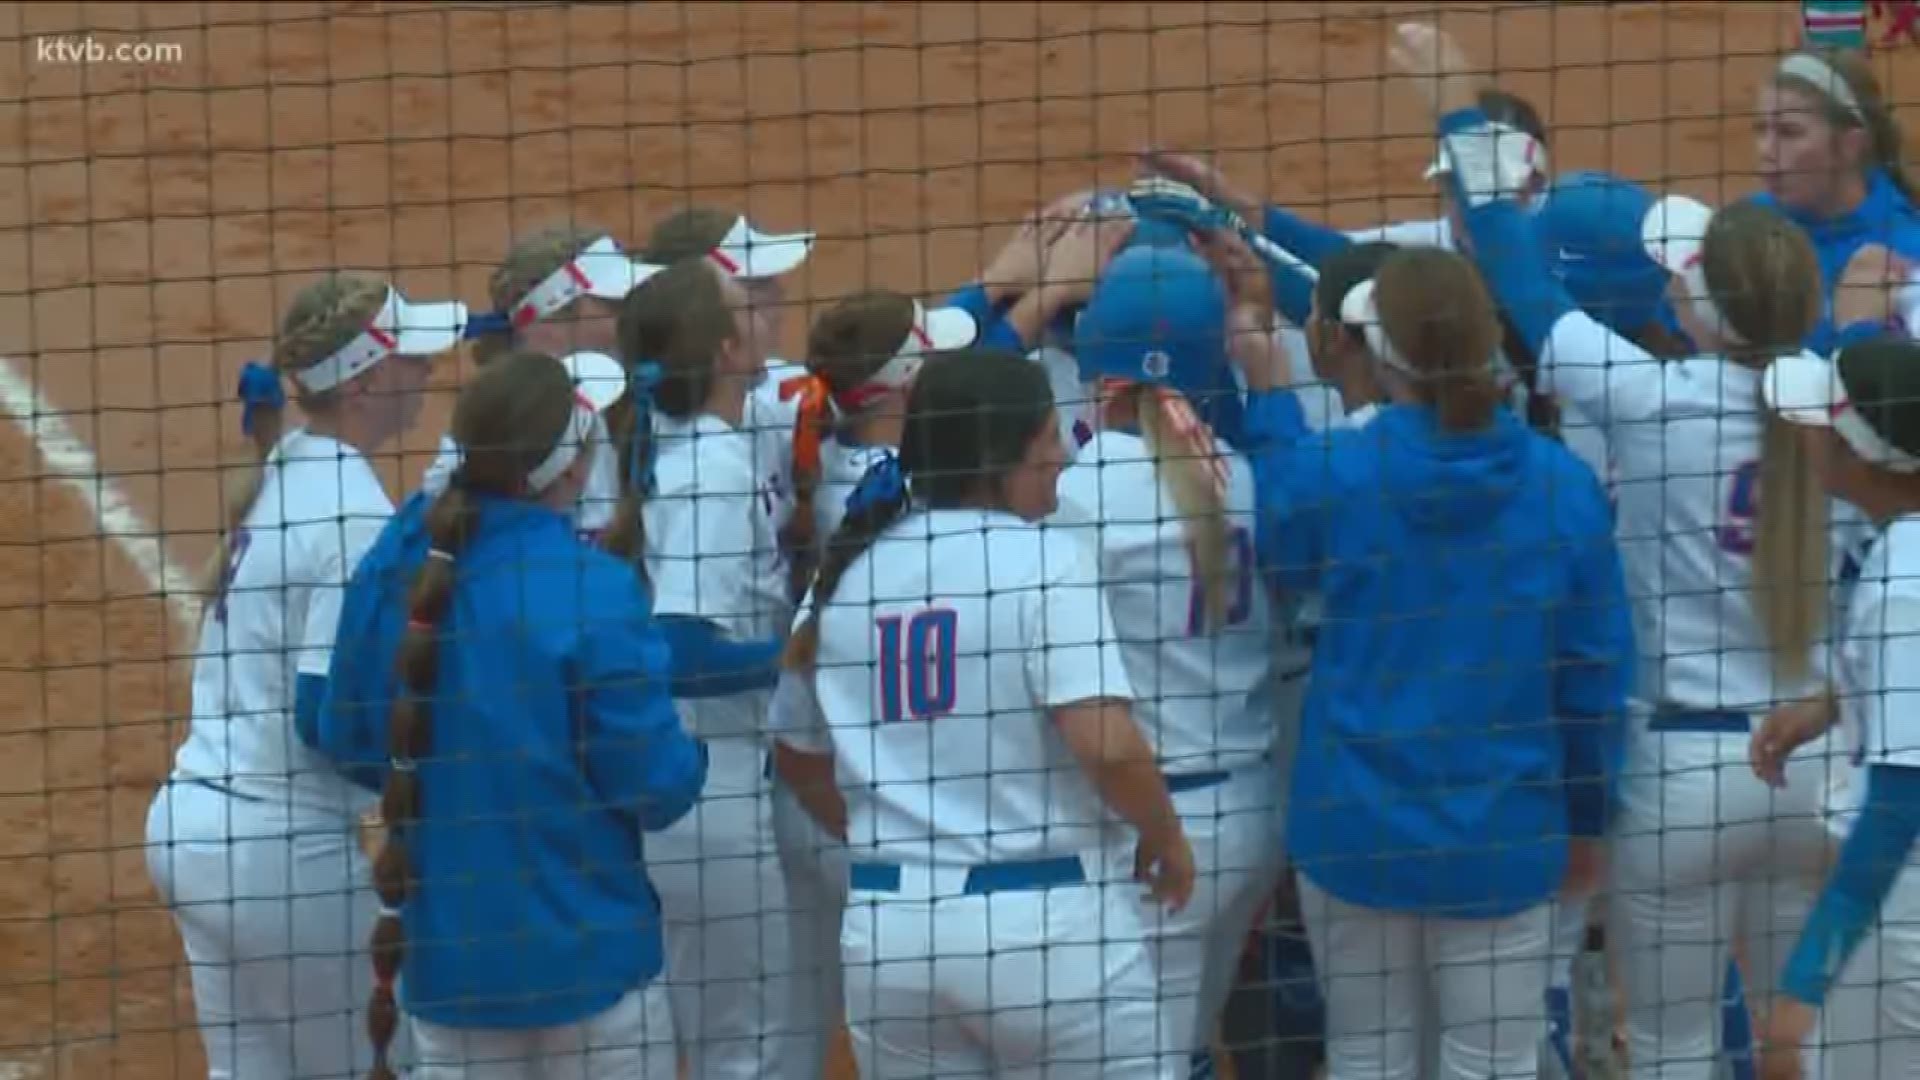 The Broncos clinched their first-ever MW championship and a berth in NCAA Regionals after sweeping New Mexico